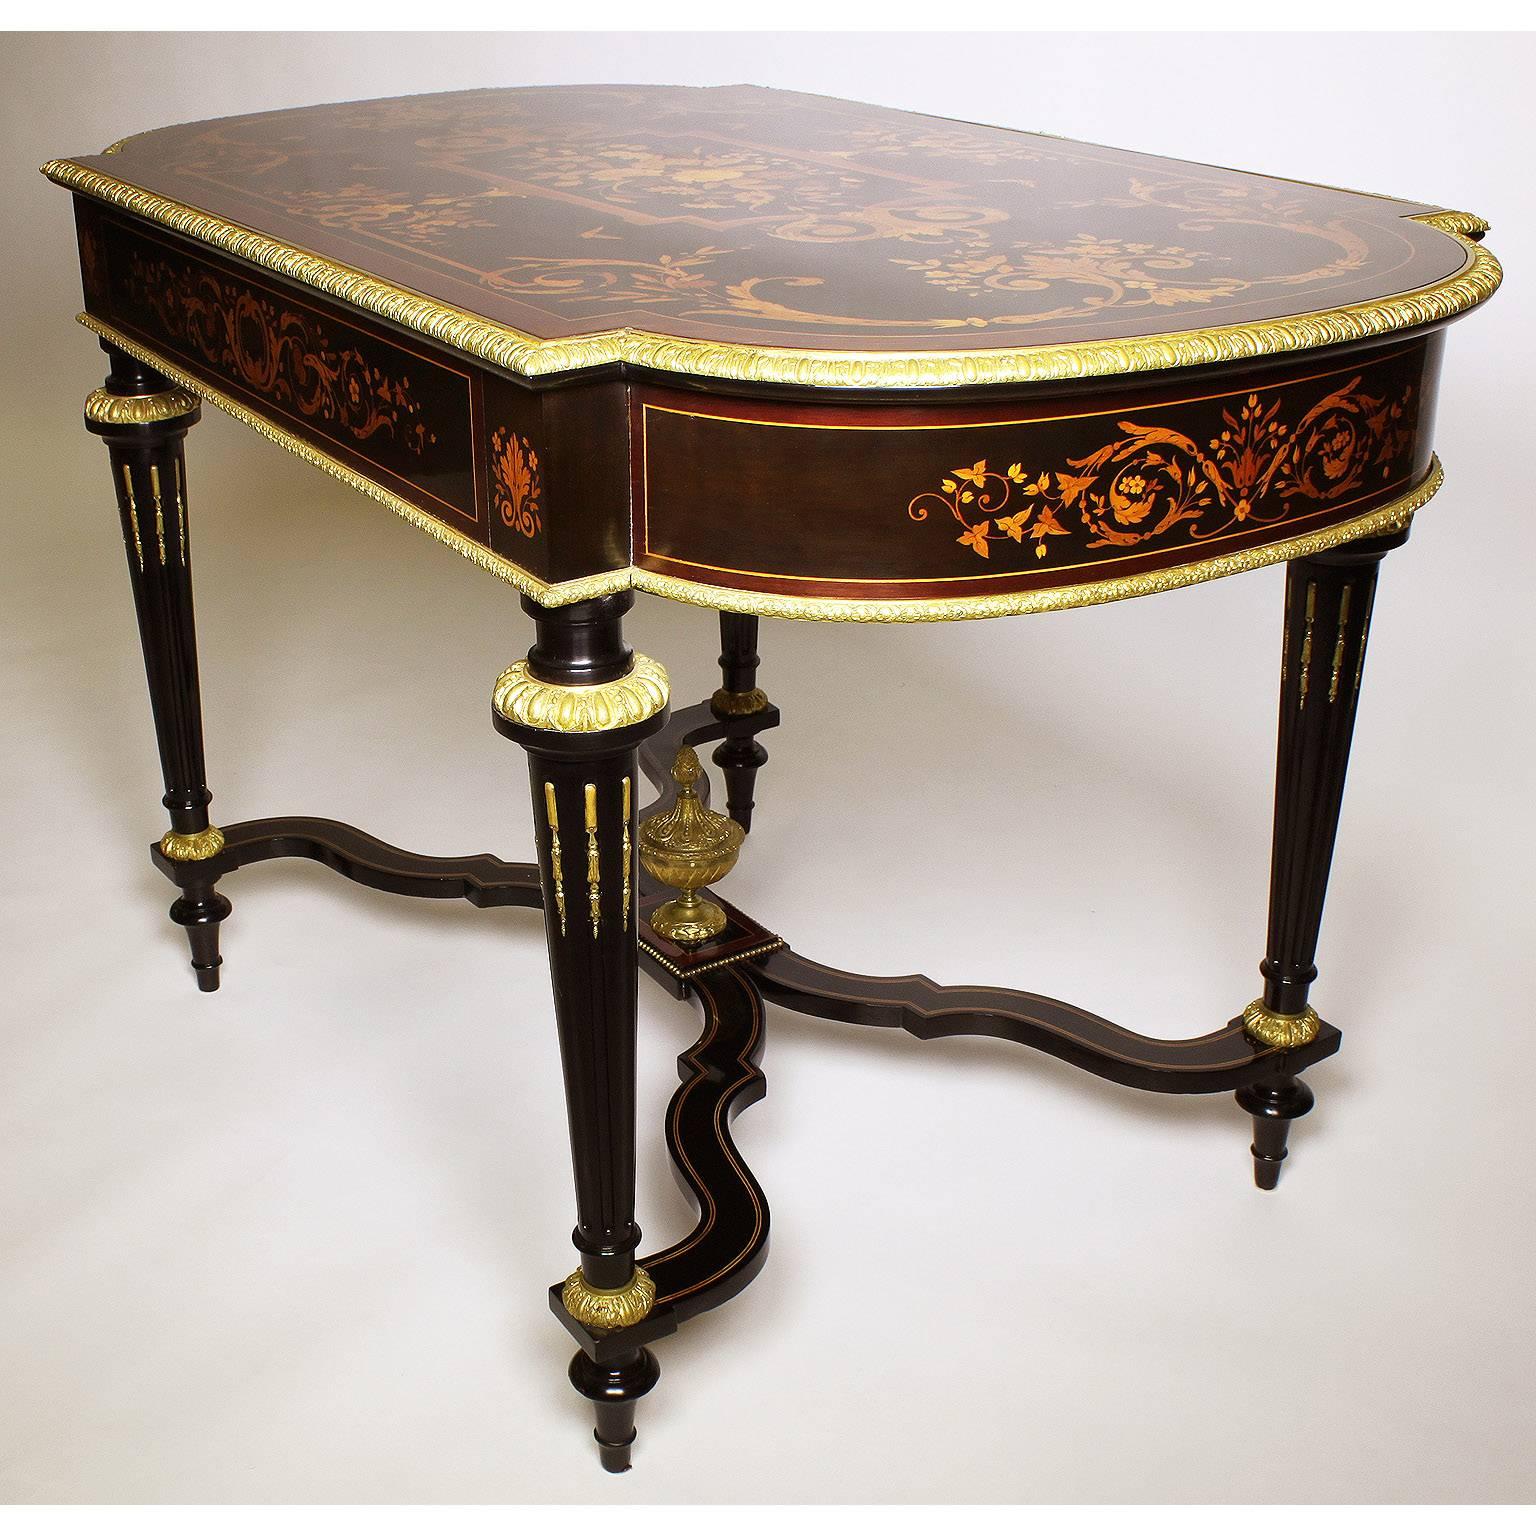 Early 20th Century French 19th Century Louis XVI Style Gilt Bronze-Mounted Center, Writing Table For Sale